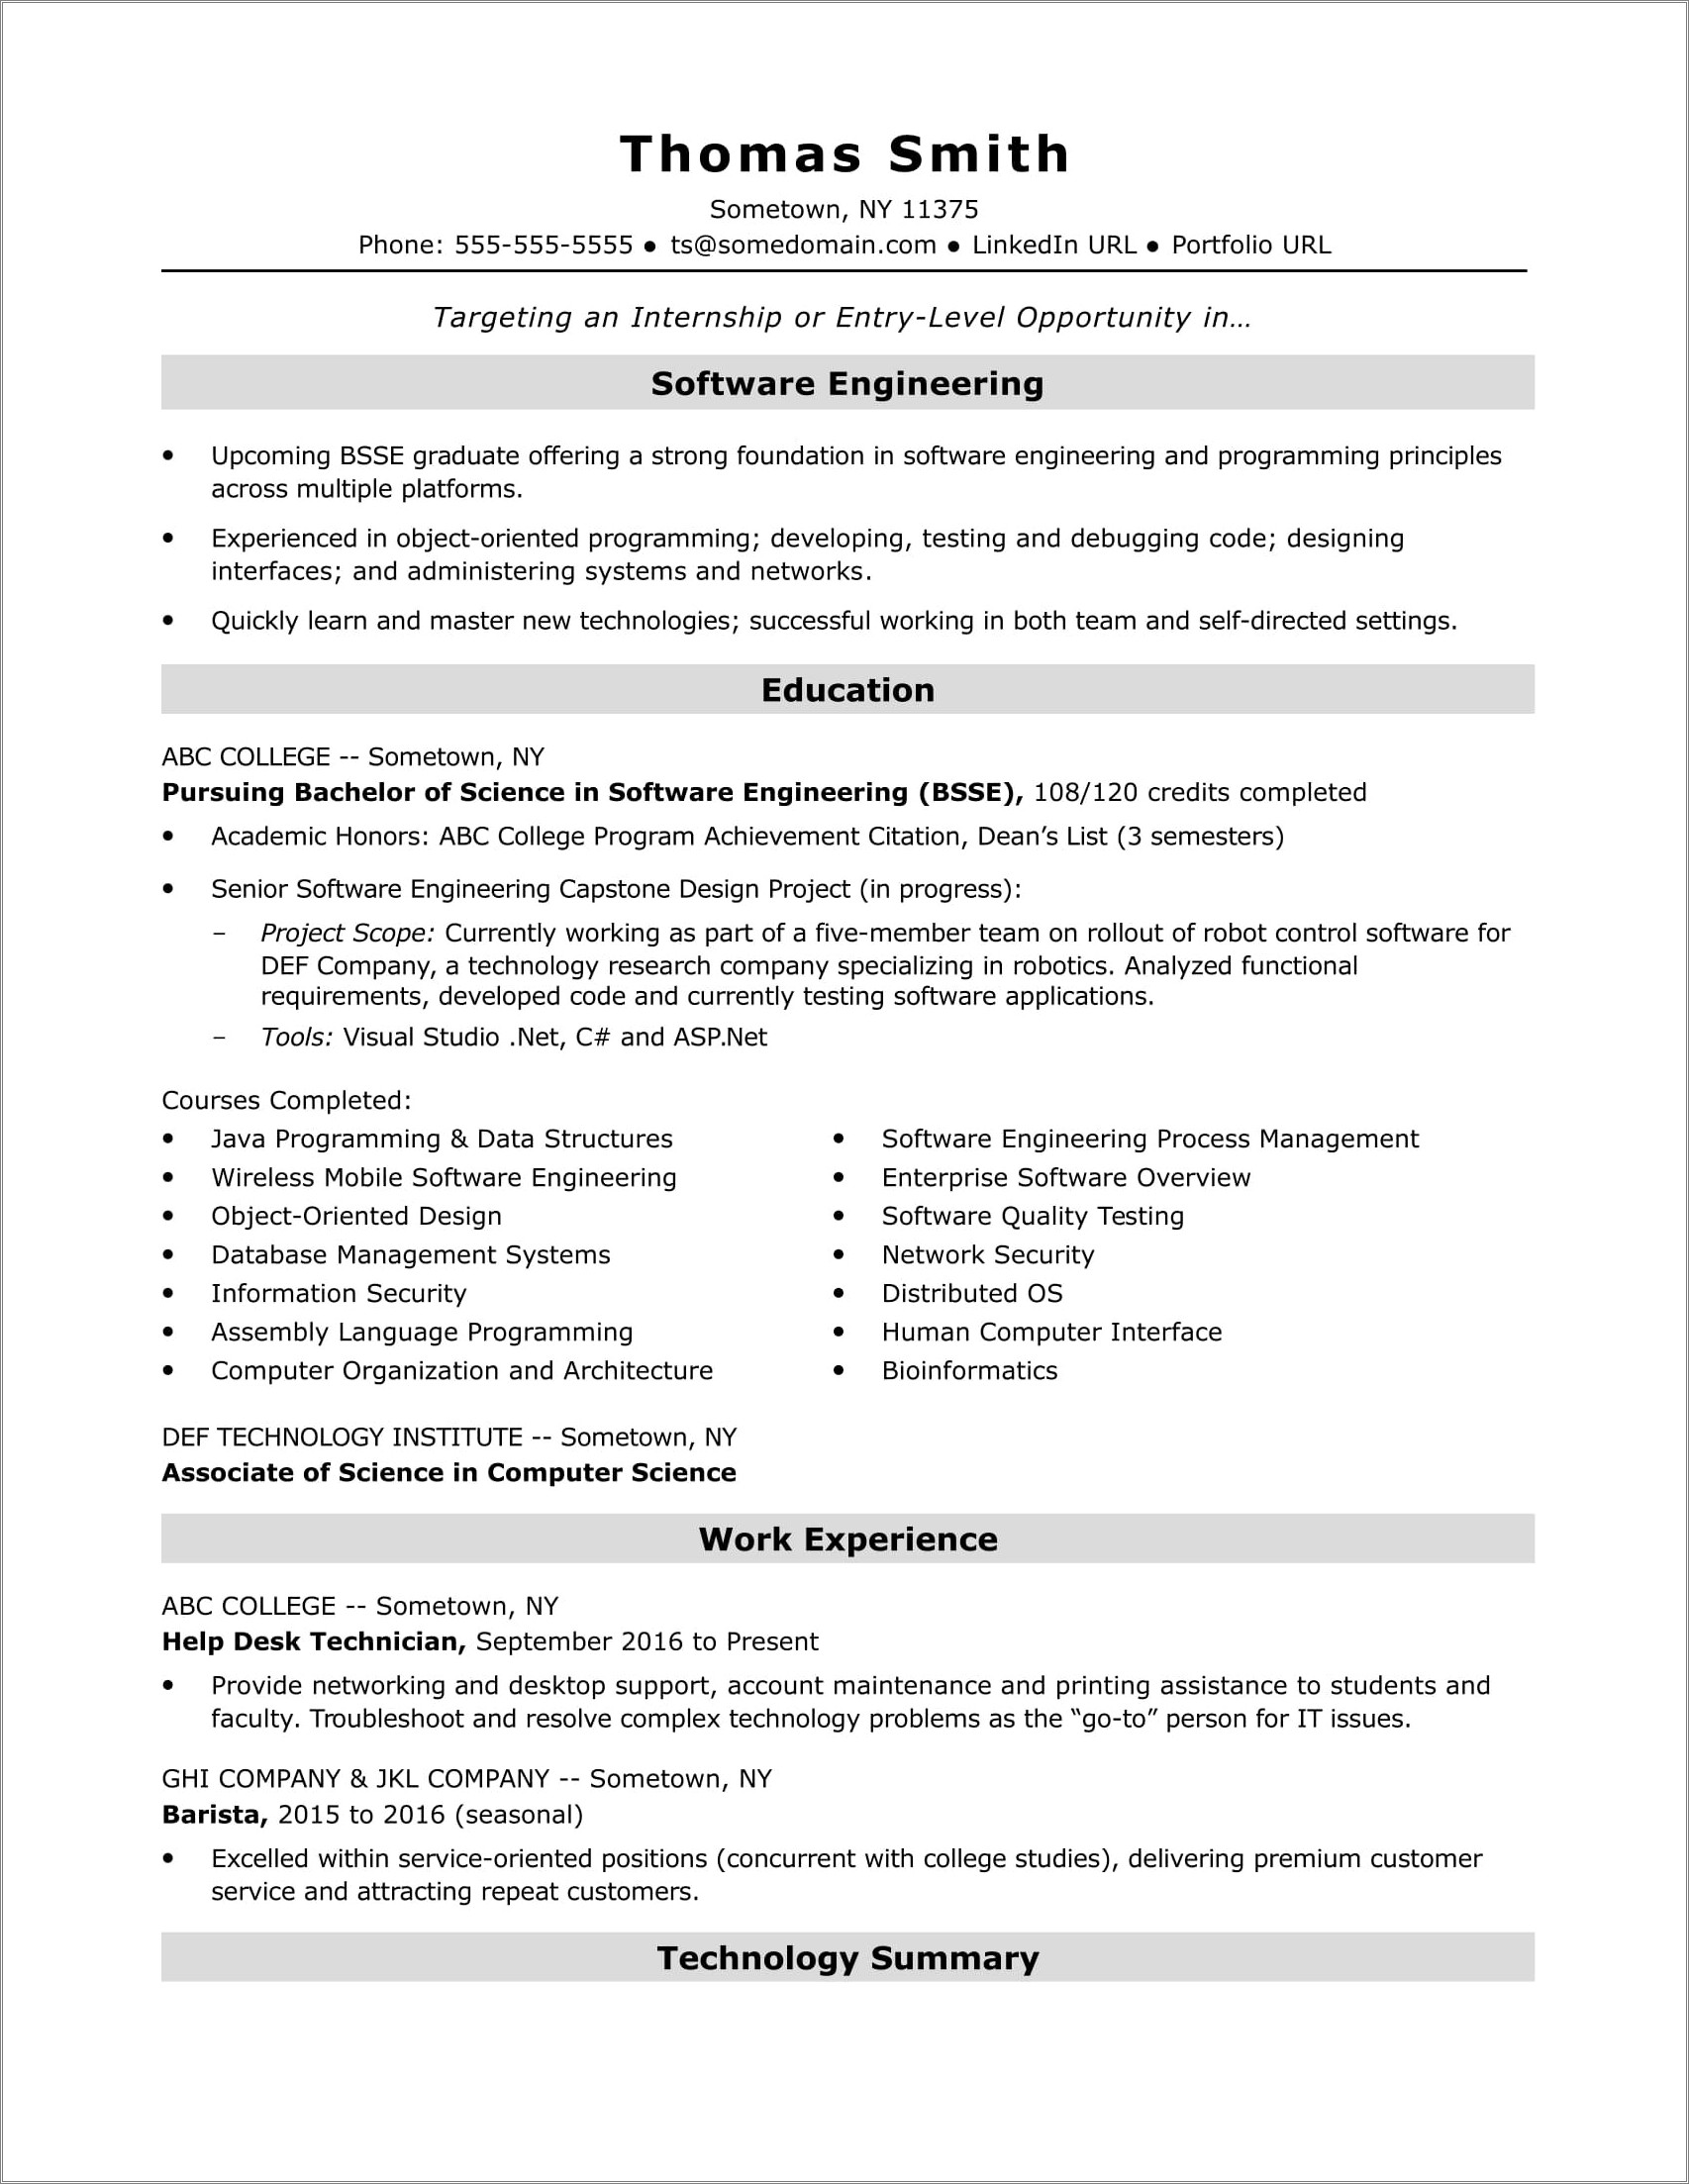 Fresh Out Of College Resume Examples